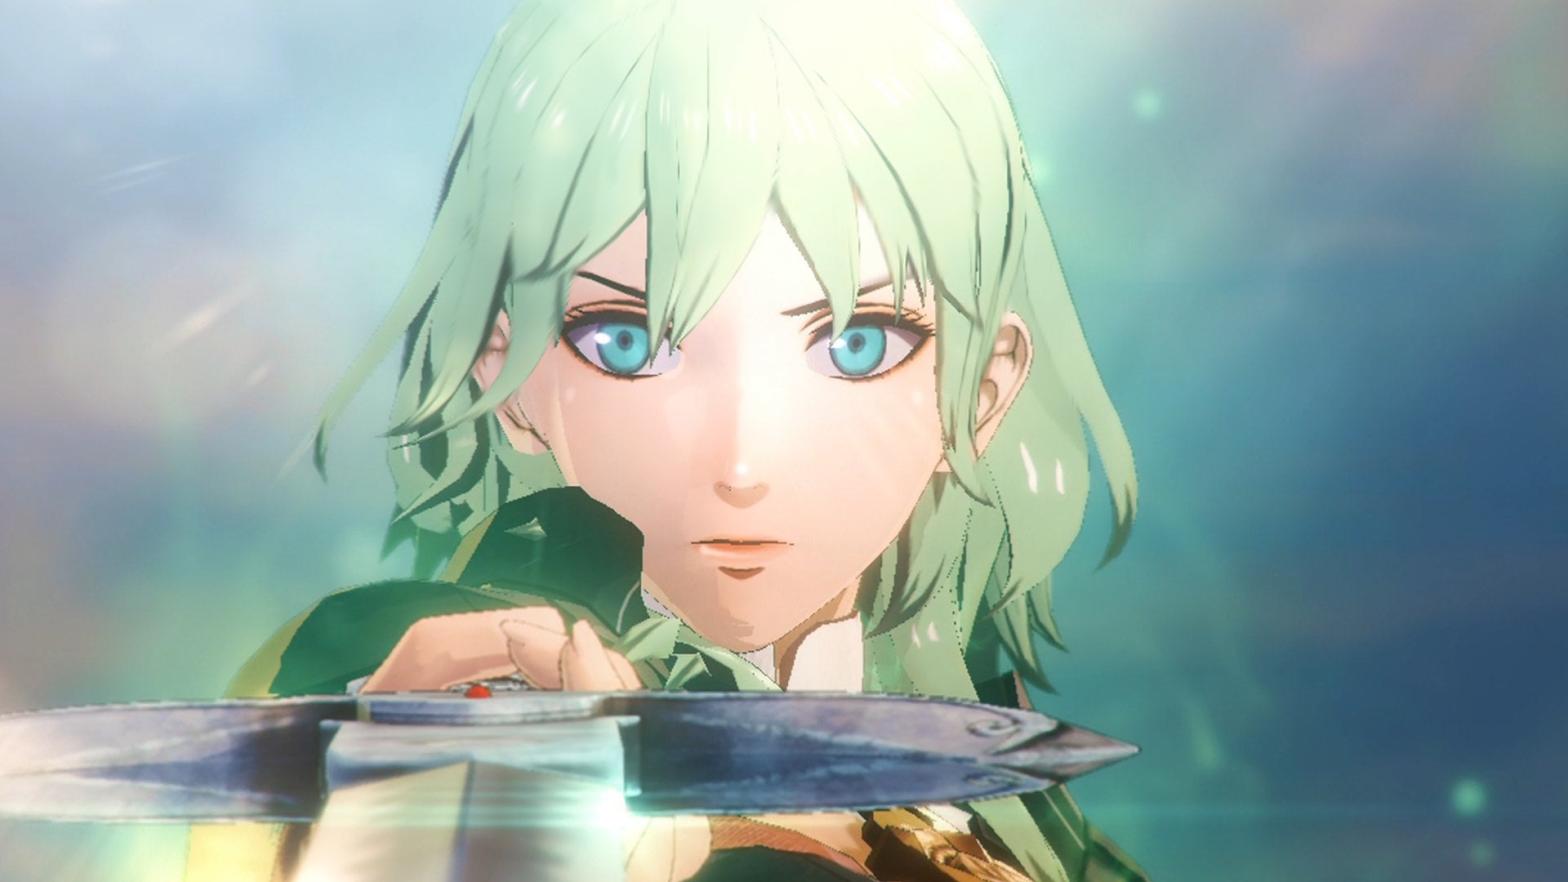 Nintendo made a demo available this week for June's big release, Fire Emblem Warriors: Three Houses. (Screenshot: Nintendo)